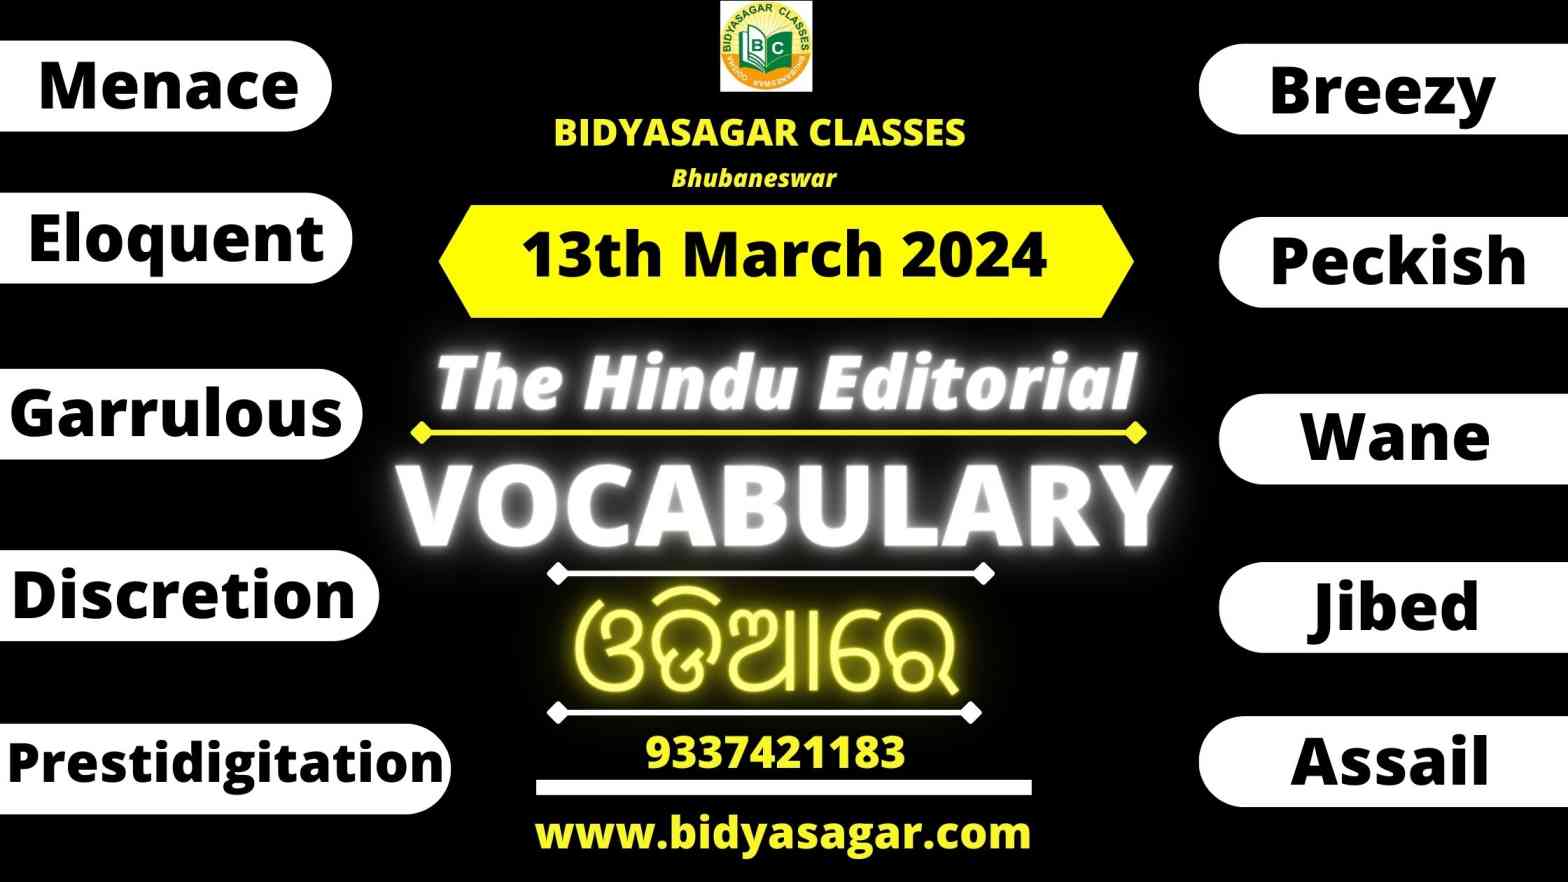 The Hindu Editorial Vocabulary of 13th March 2024